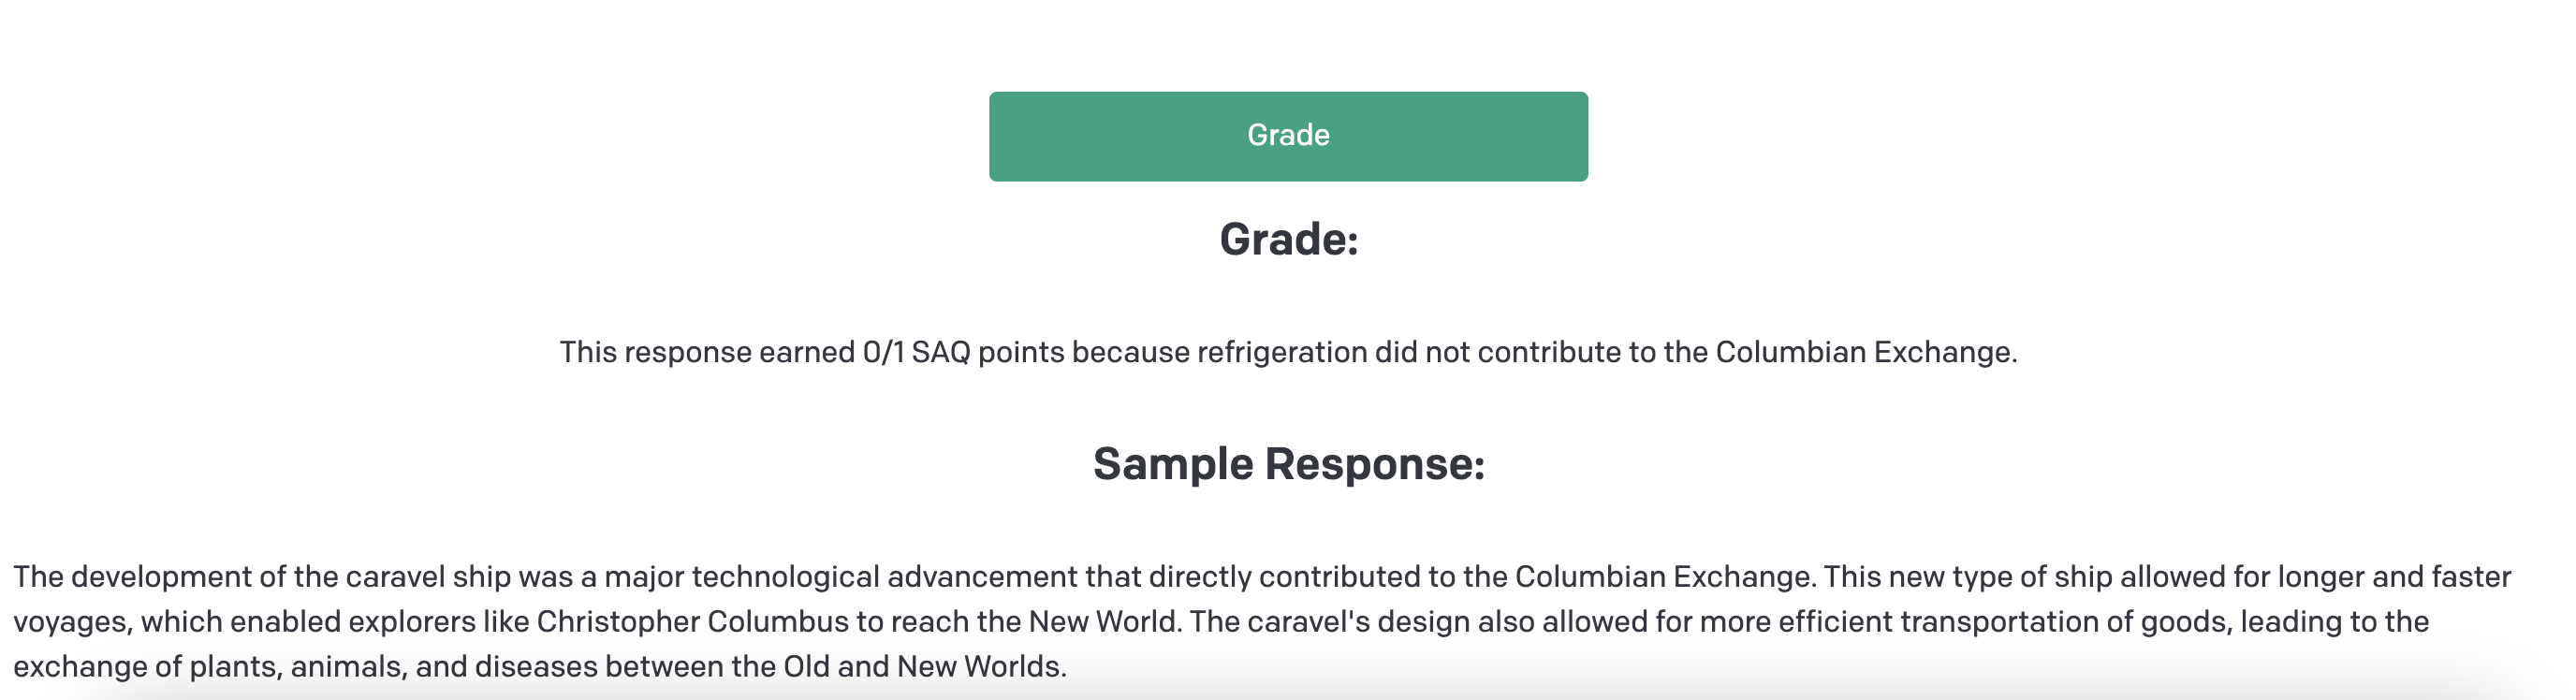 Sample response being graded by AI